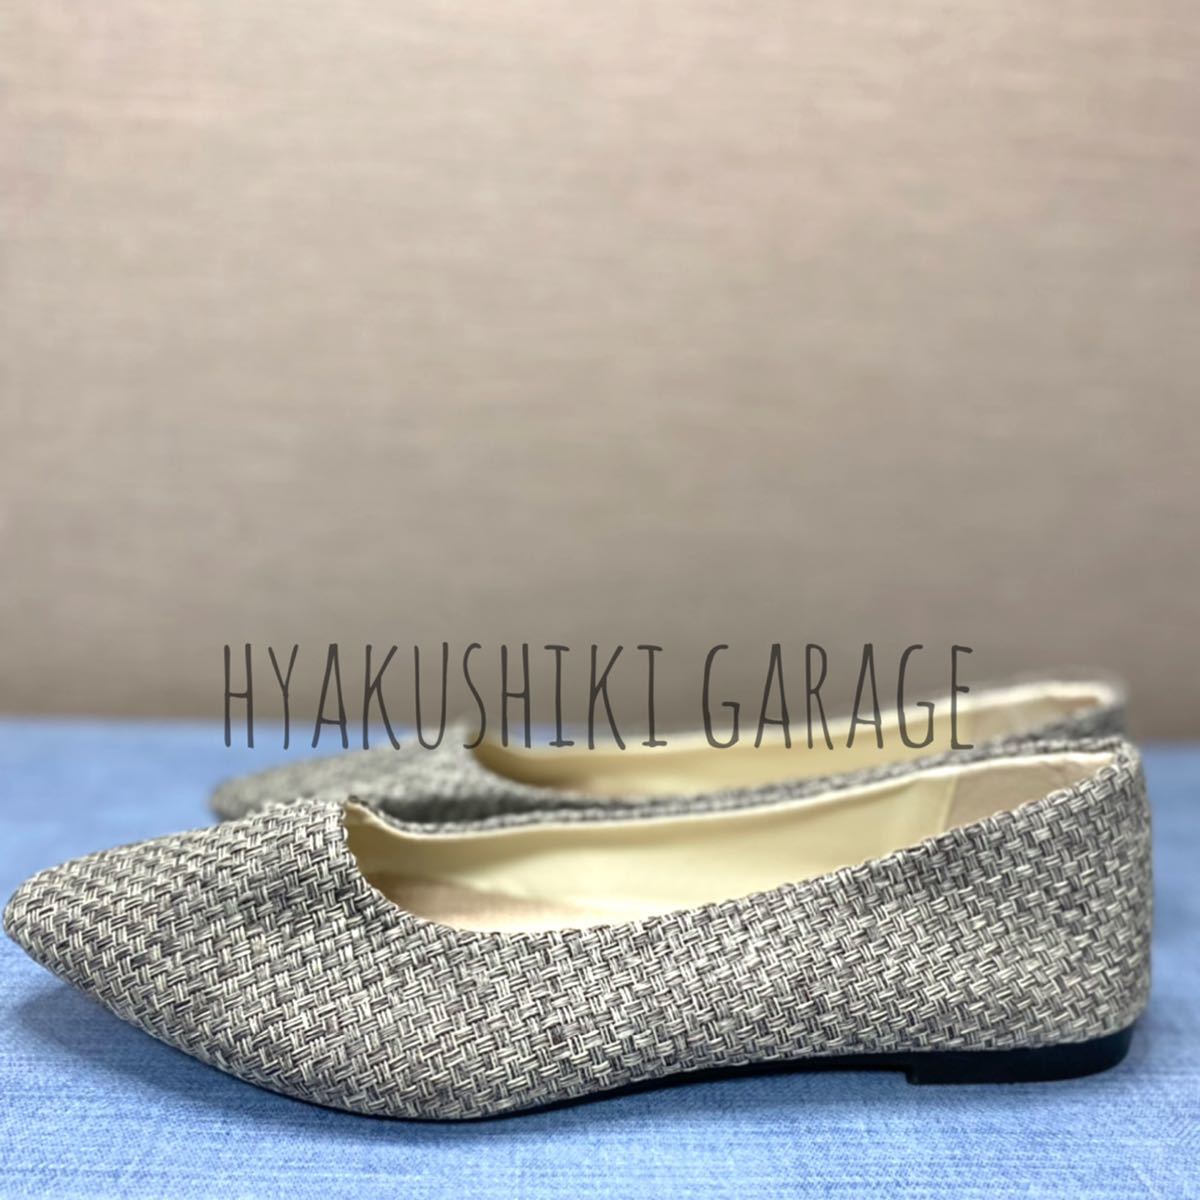 C26-47 26.5cm large size knitting manner pumps lady's gray new goods unused 